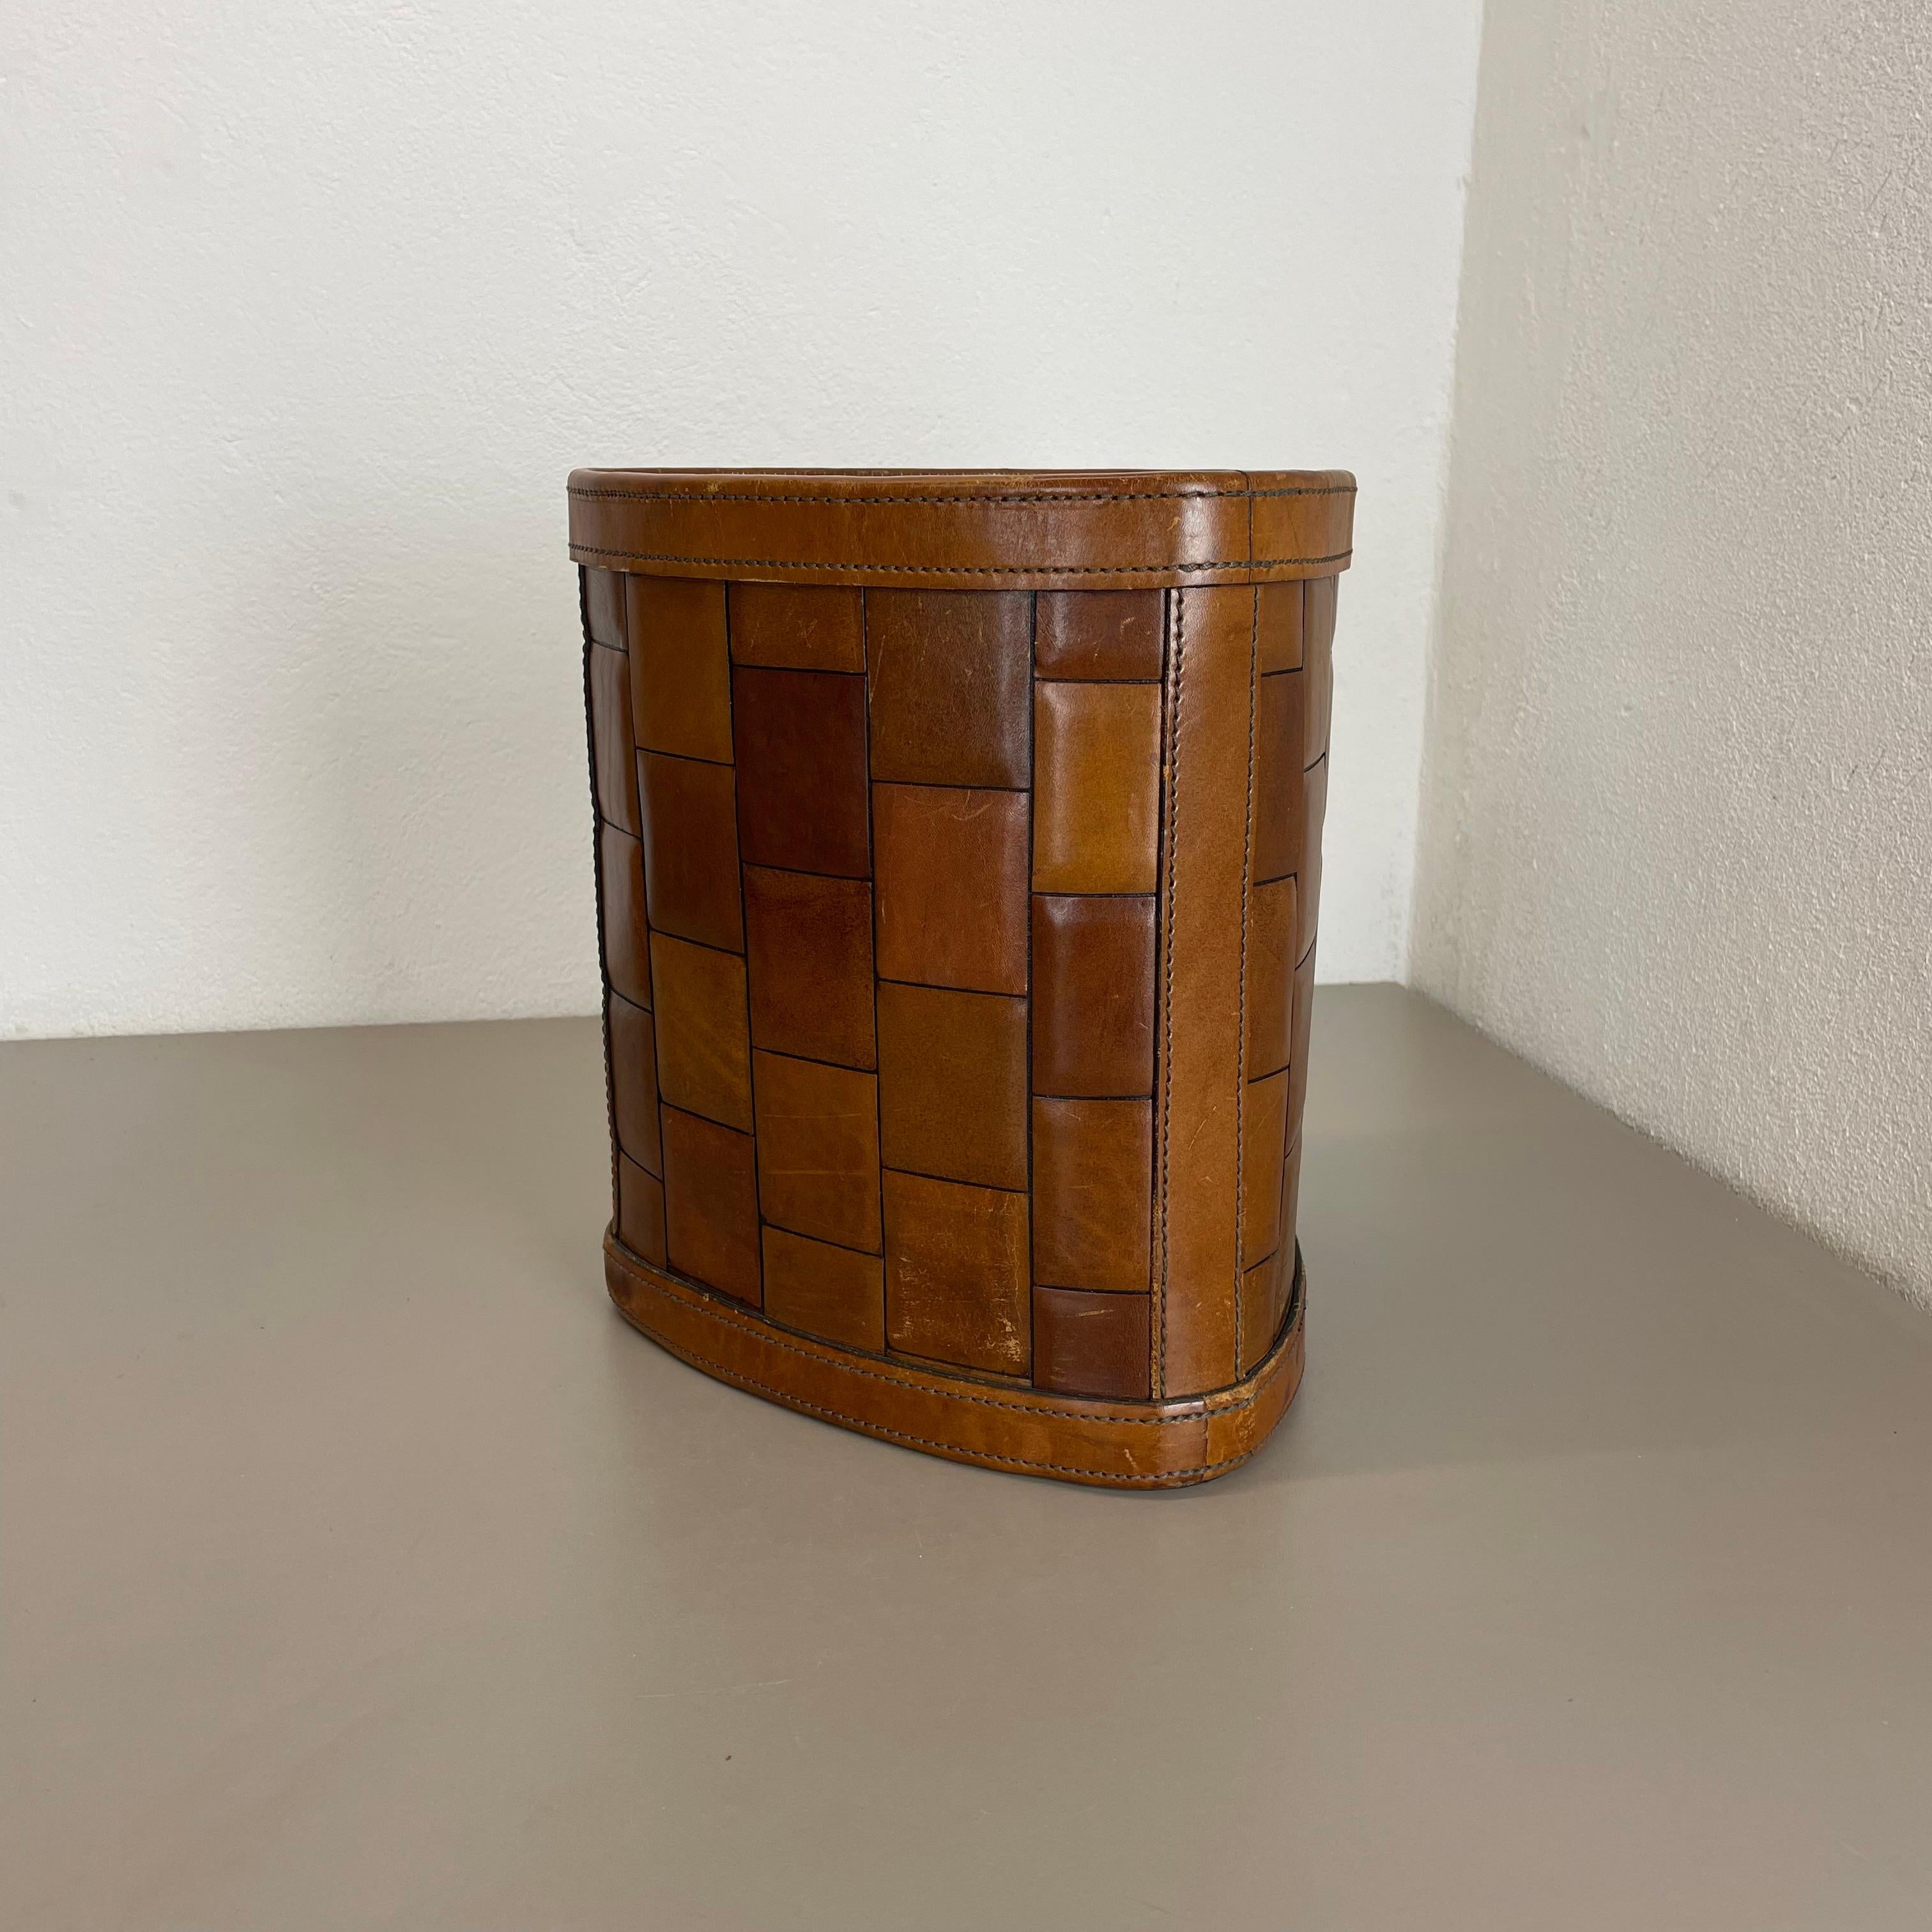 Article: waste bin paper bin basket

Origin: Germany

Age: 1960s

This original vintage Auböck style waste bin paper bin basket was produced in the 1960s in Germany. It is made of natural leather in a nice patchwork optic. this item has a fantastic